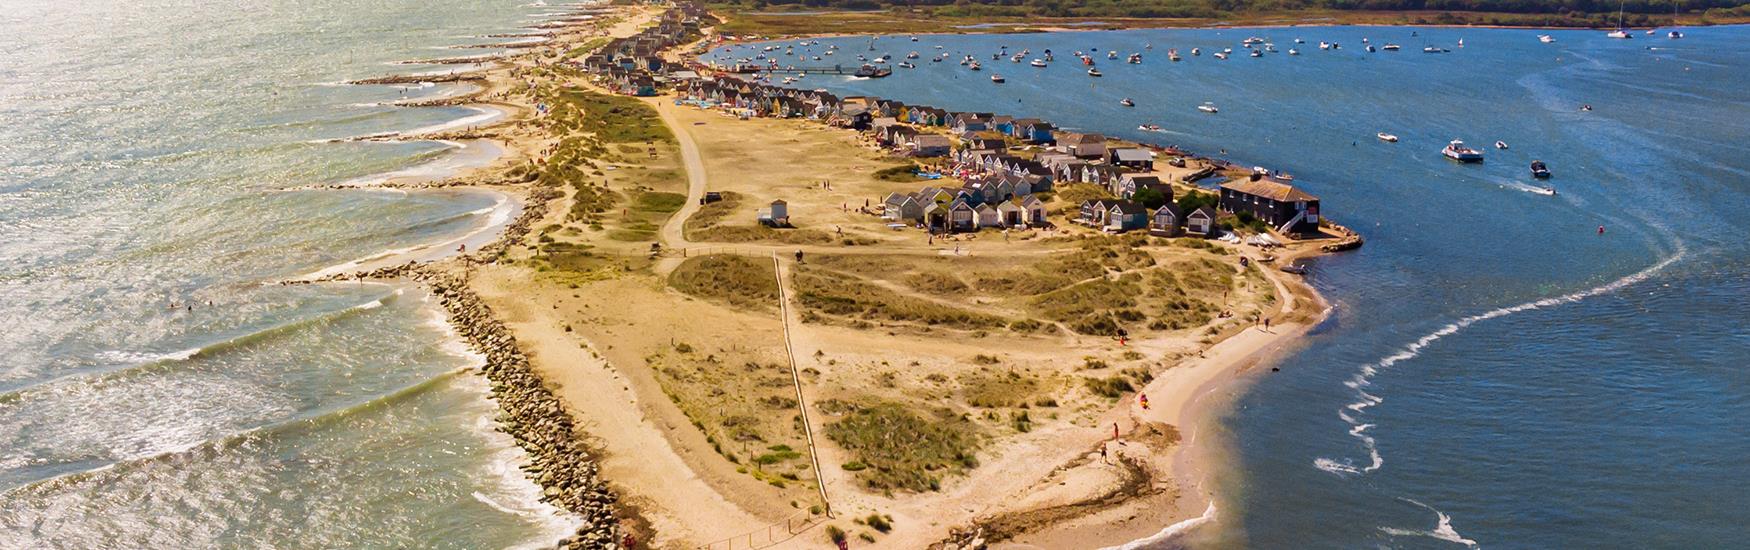 Aerial shot of mudeford beach on a sunny day with beach huts cascading into the distance